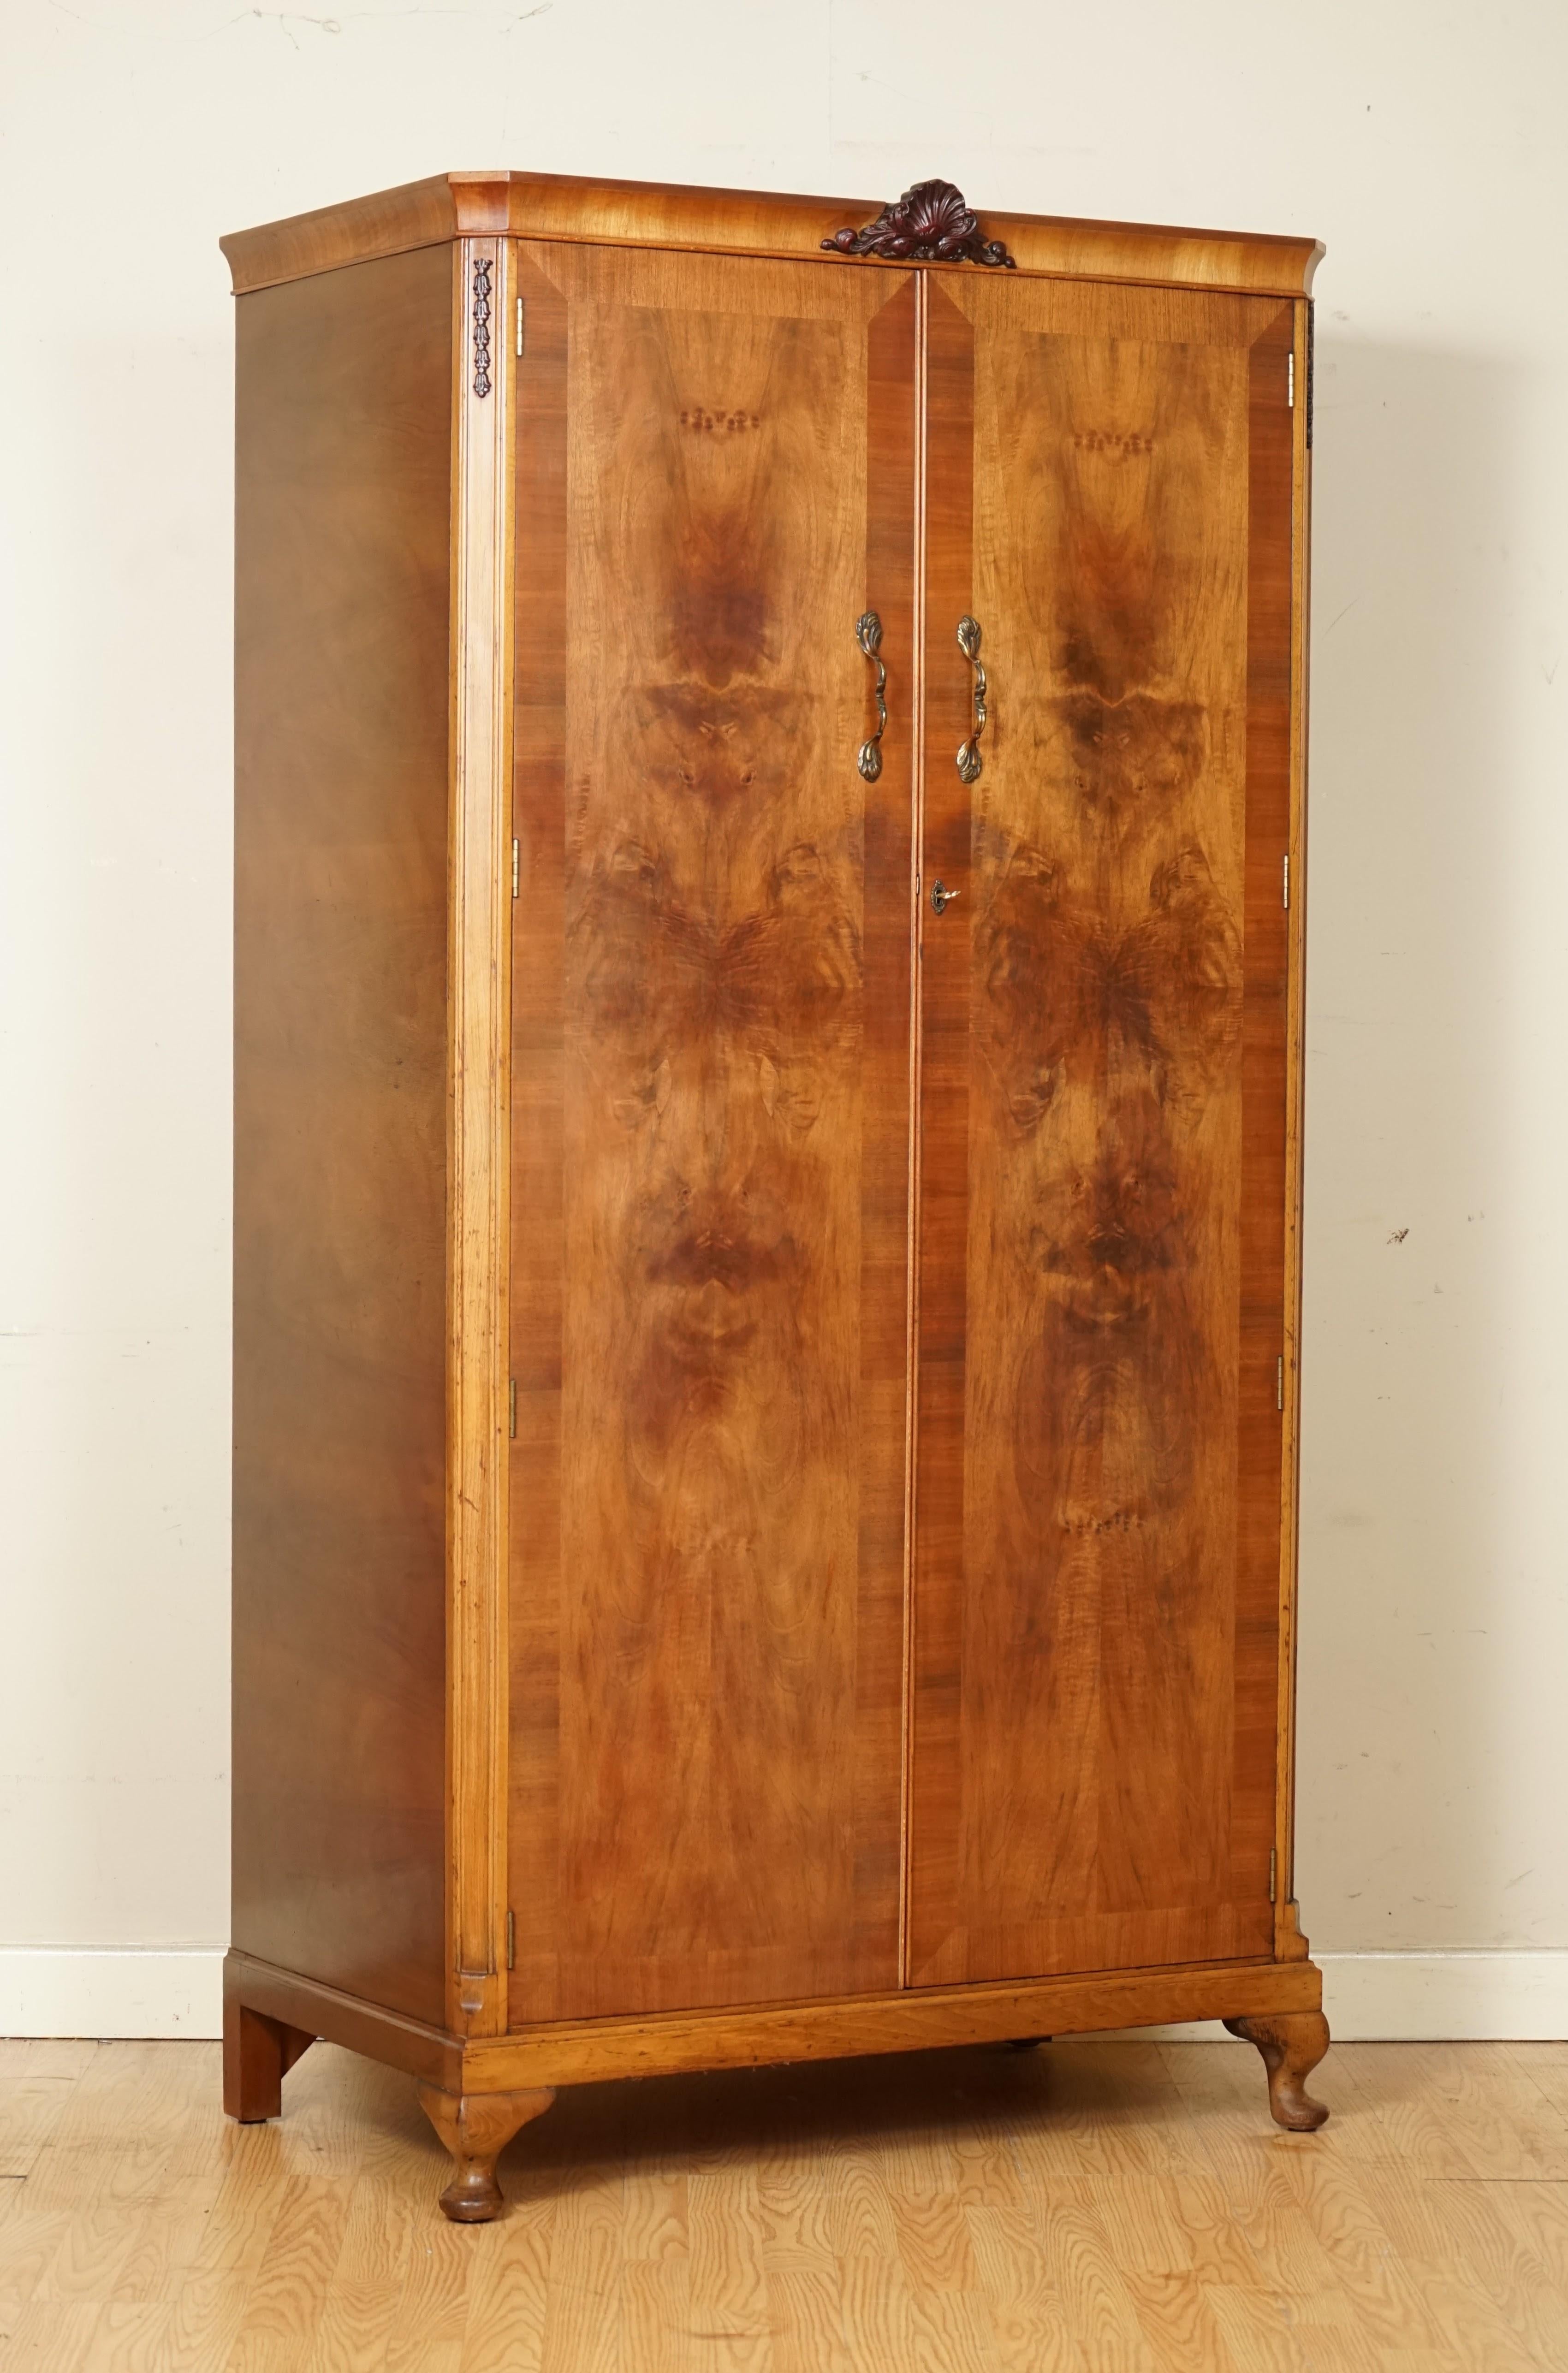 We are so excited to present to you this beautiful Art Deco burr walnut wardrobe.

A lovely and decorative wardrobe, inside you will find a rail to hang your clothes as well as a shelve above and shelves on the right side. 

Please carefully